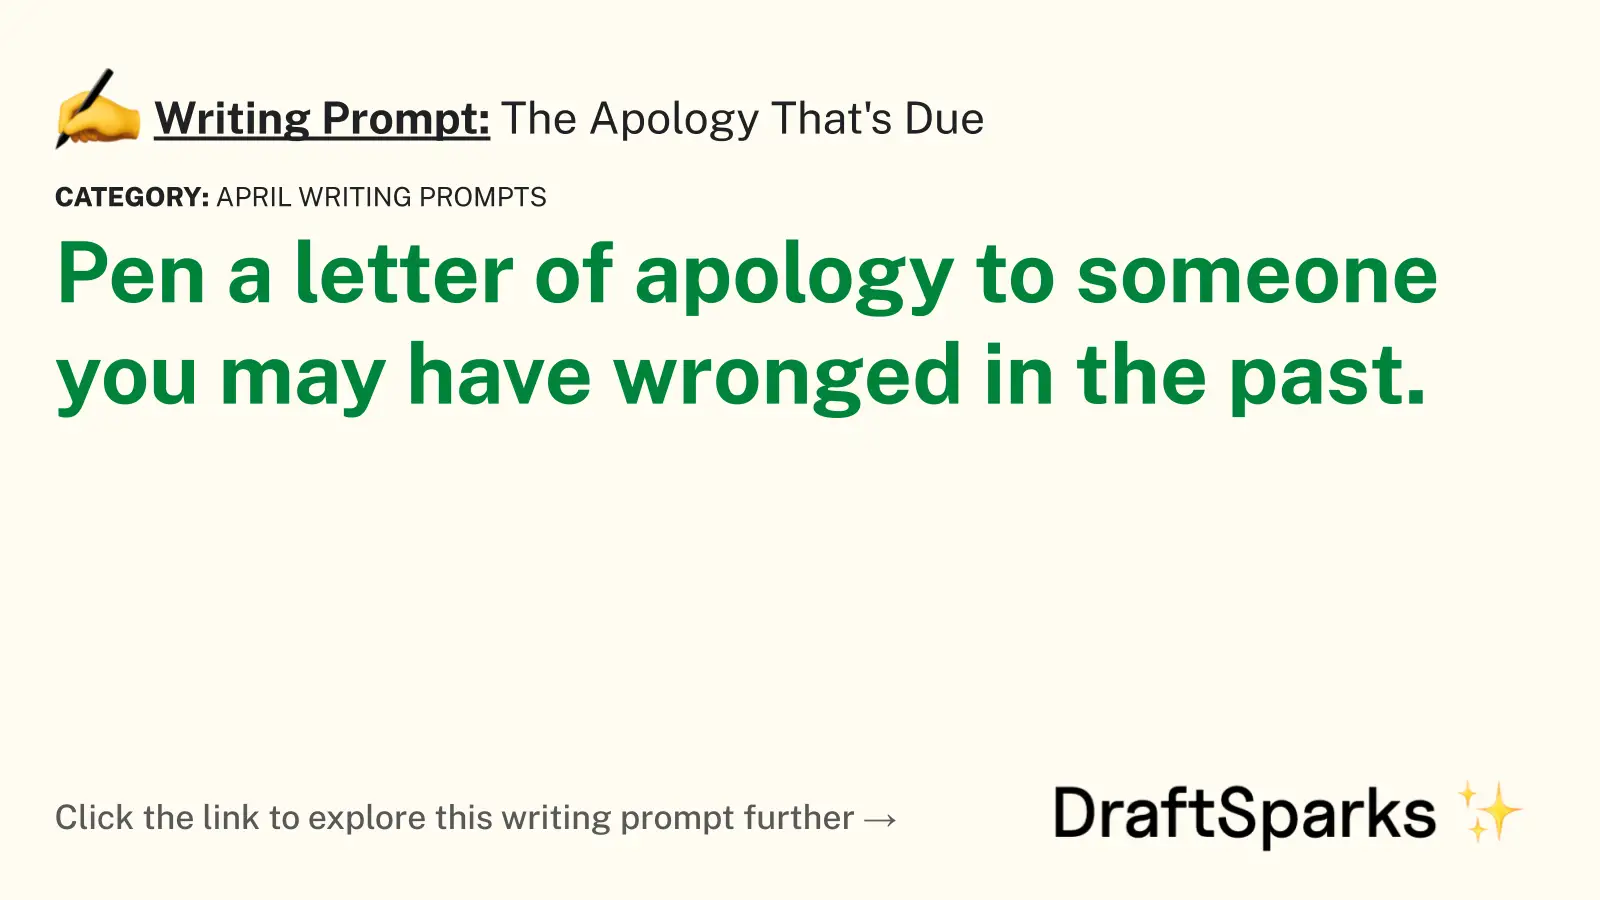 The Apology That’s Due